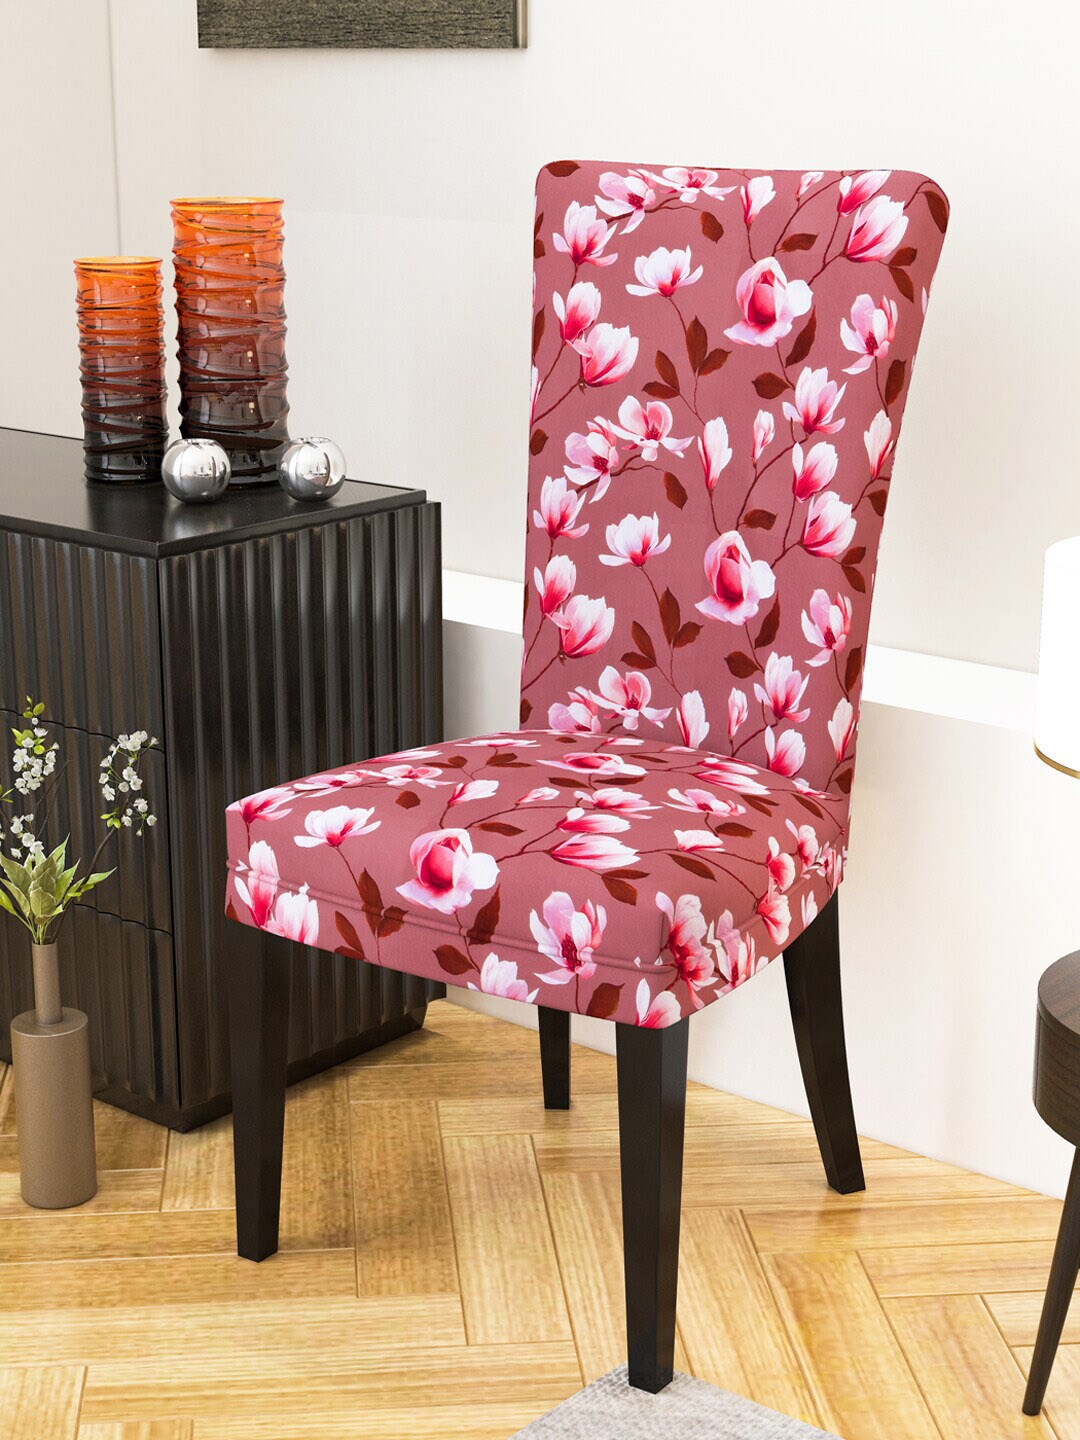 Nendle Set Of 4 Floral Printed Chair Cover Price in India